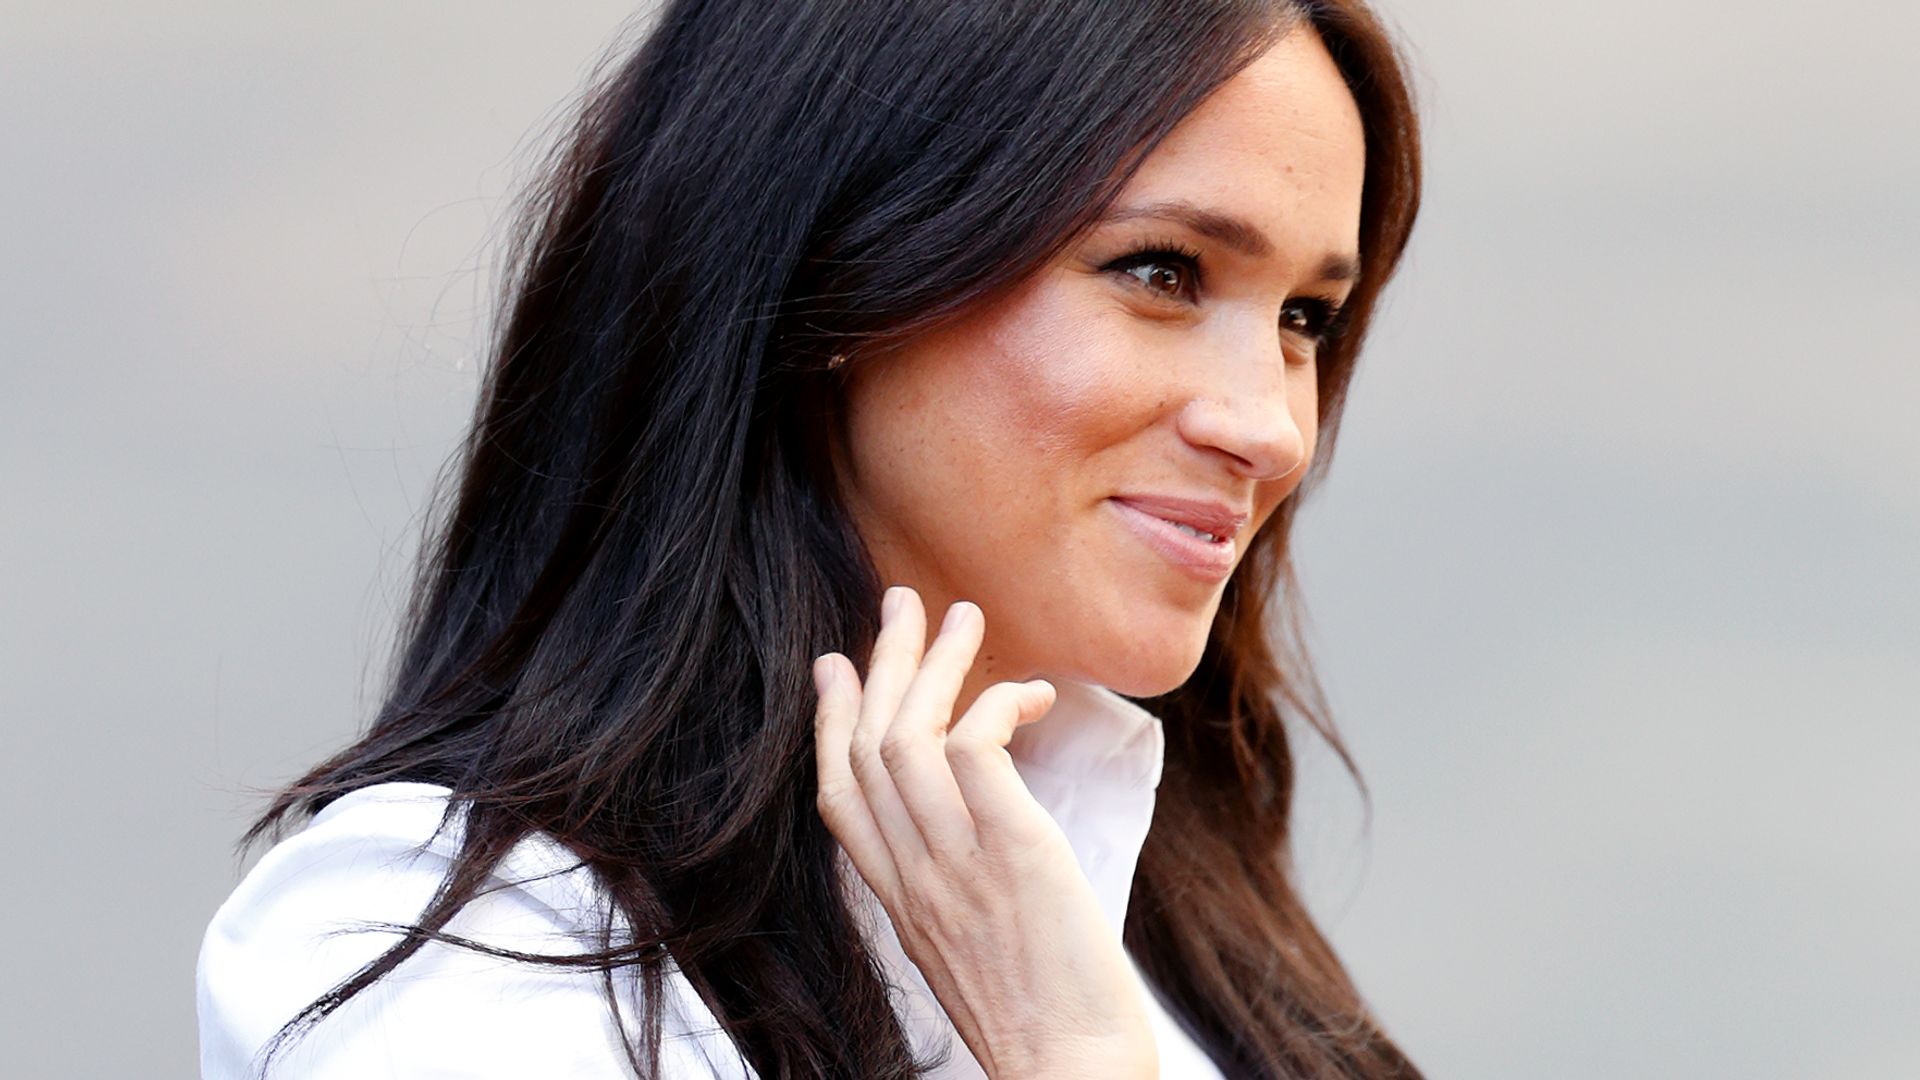 LONDON, UNITED KINGDOM - SEPTEMBER 12: (EMBARGOED FOR PUBLICATION IN UK NEWSPAPERS UNTIL 24 HOURS AFTER CREATE DATE AND TIME) Meghan, Duchess of Sussex launches the Smart Works capsule collection on September 12, 2019 in London, England. Created in September 2013 Smart Works exists to help unemployed women regain the confidence they need to succeed at job interviews and return to employment. (Photo by Max Mumby/Indigo/Getty Images)